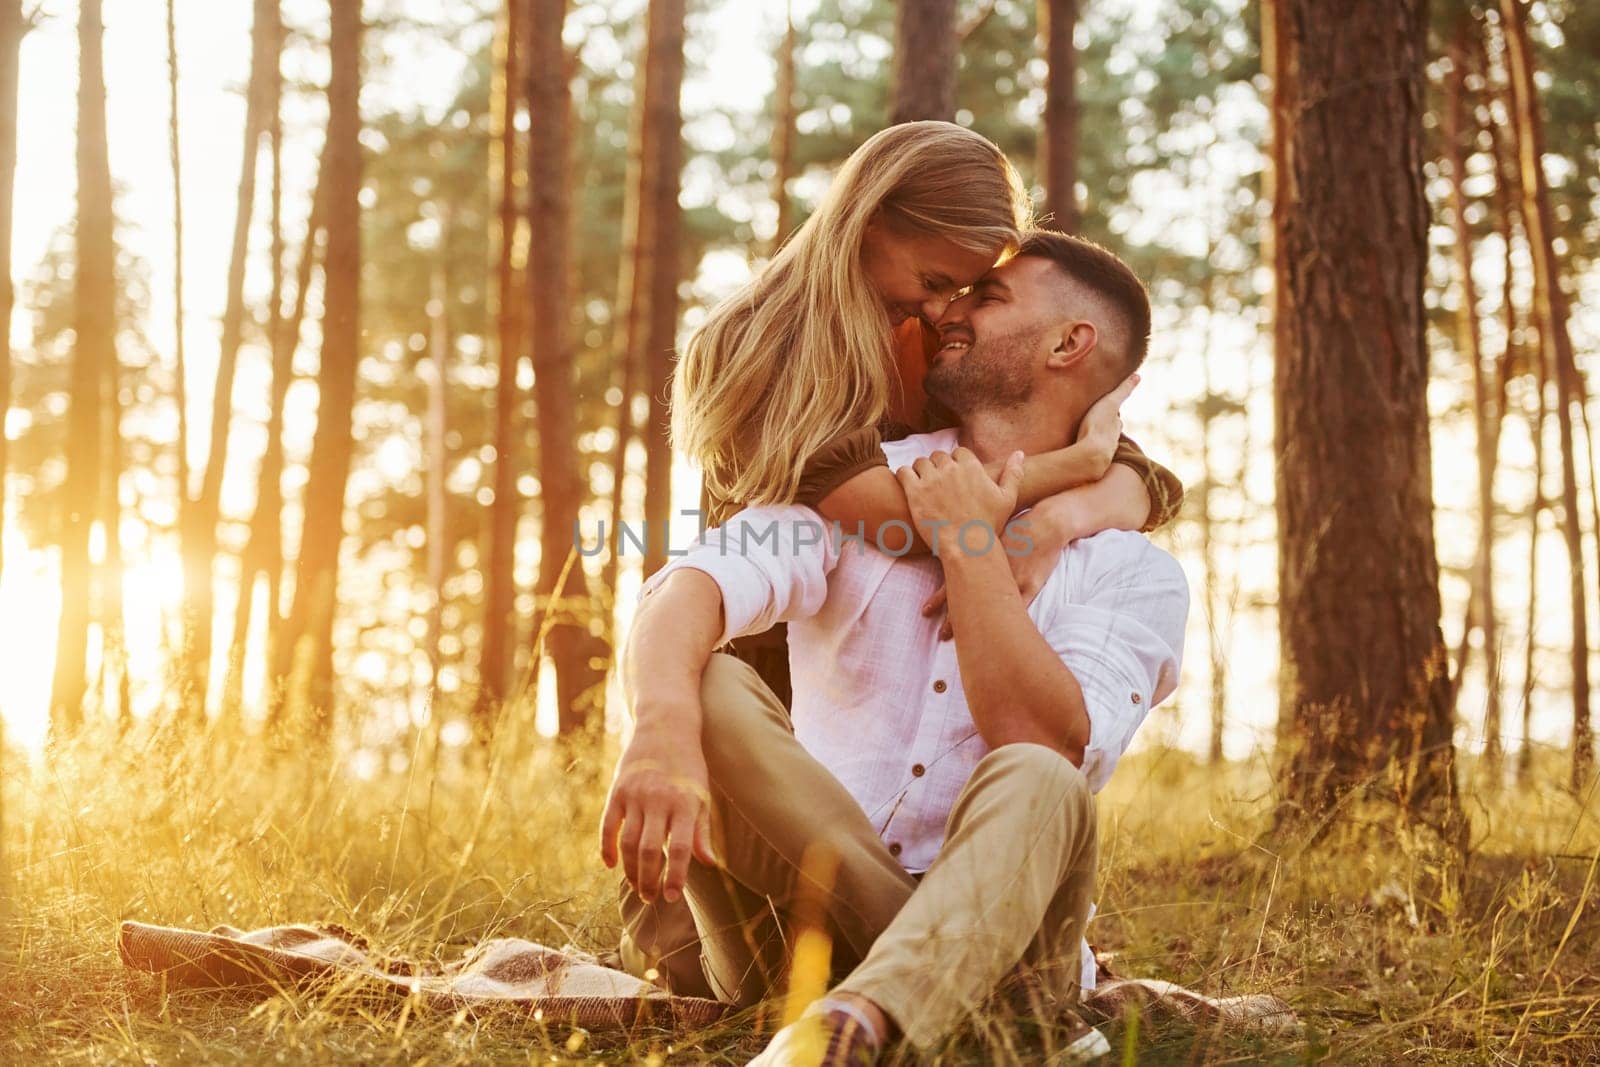 Sitting and embracing each other. Happy couple is outdoors in the forest at daytime by Standret